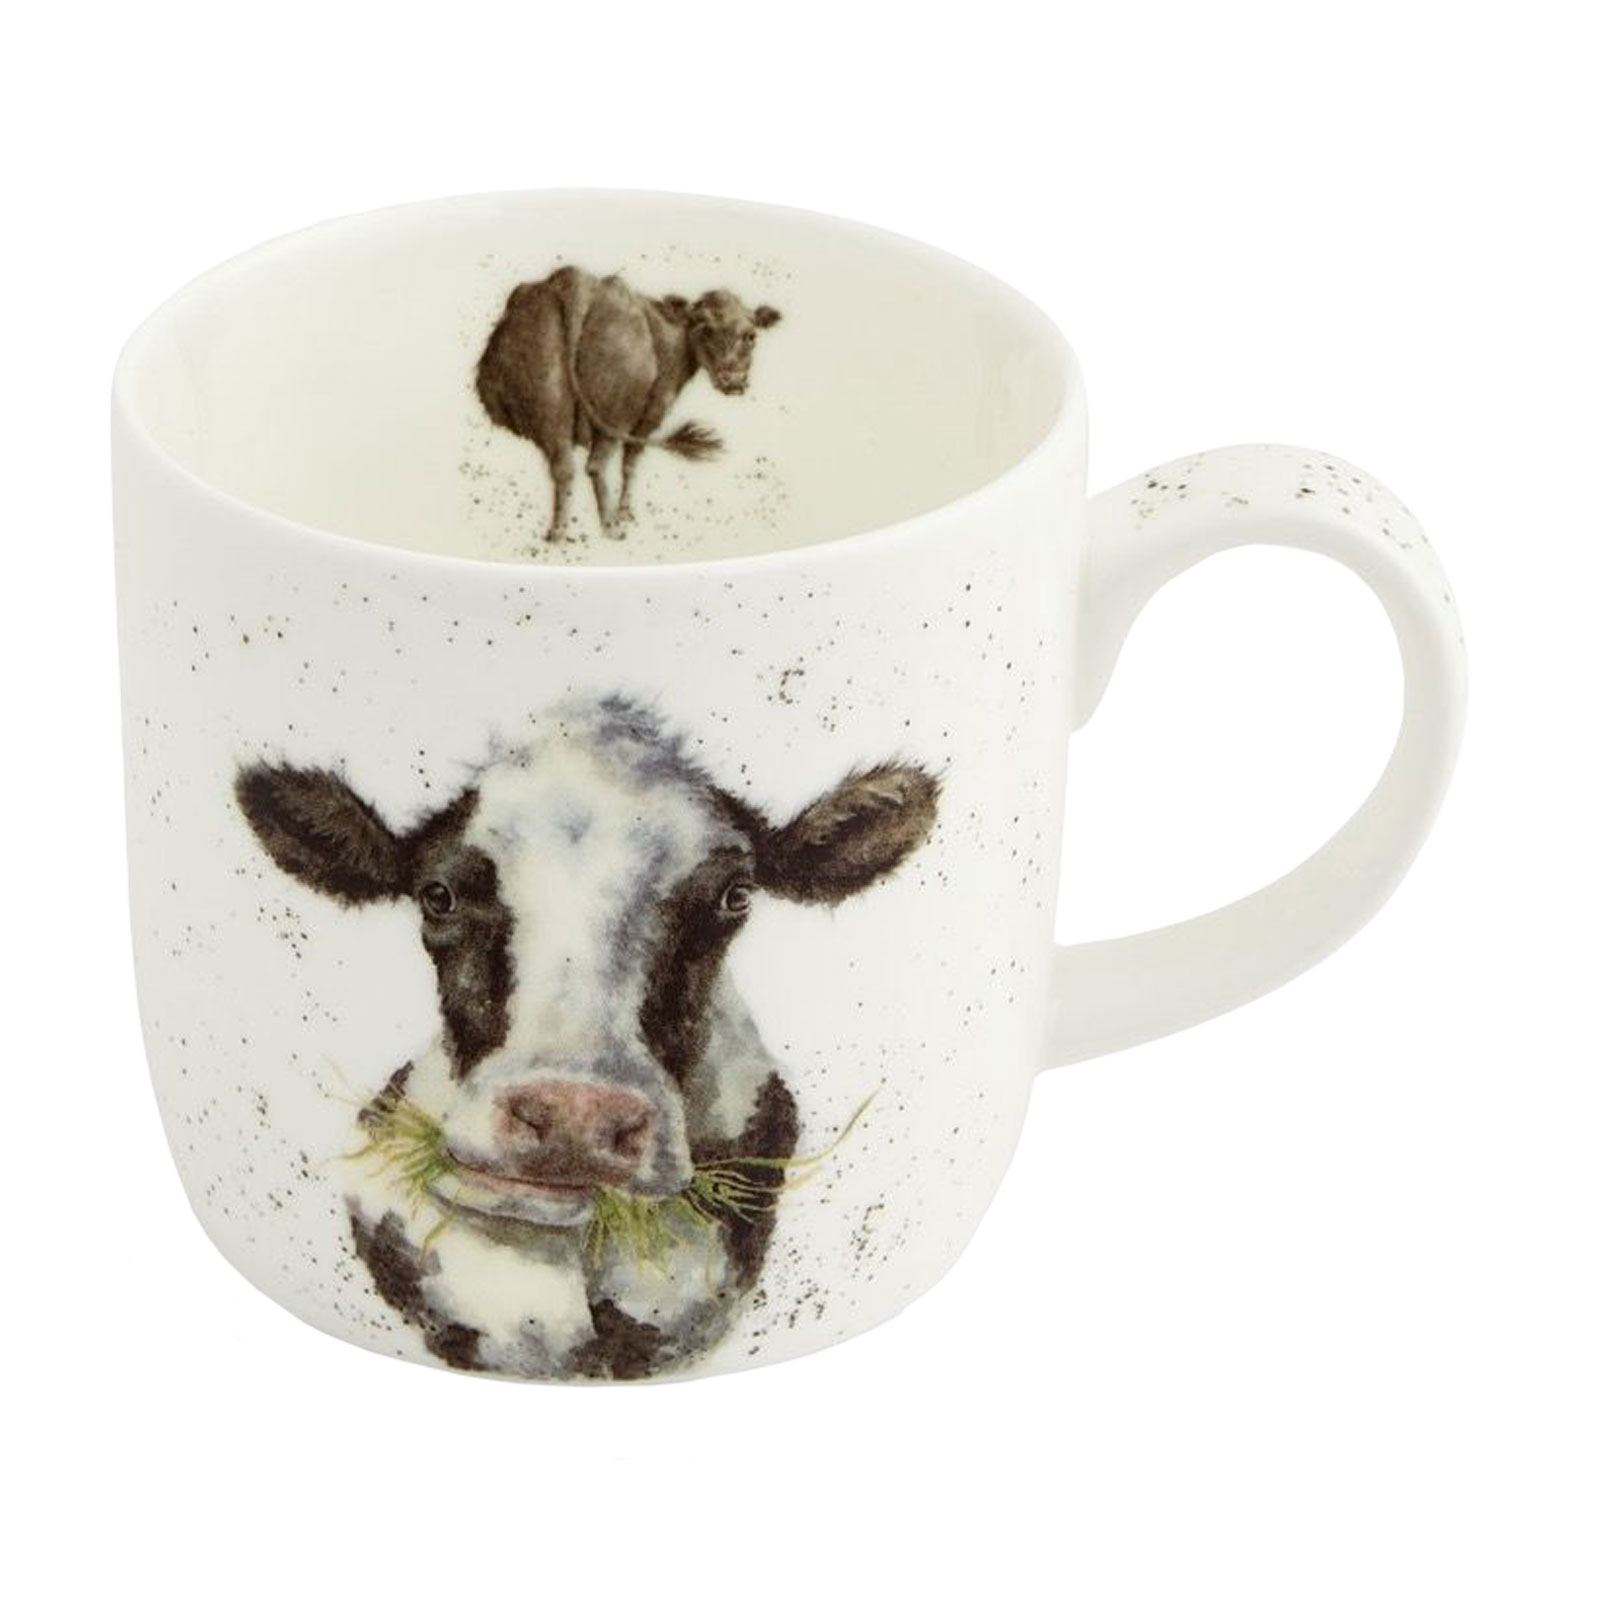 Royal Worcester Wrendale Designs Becher Mooo (Cow) / Kuh 0,31ltr.